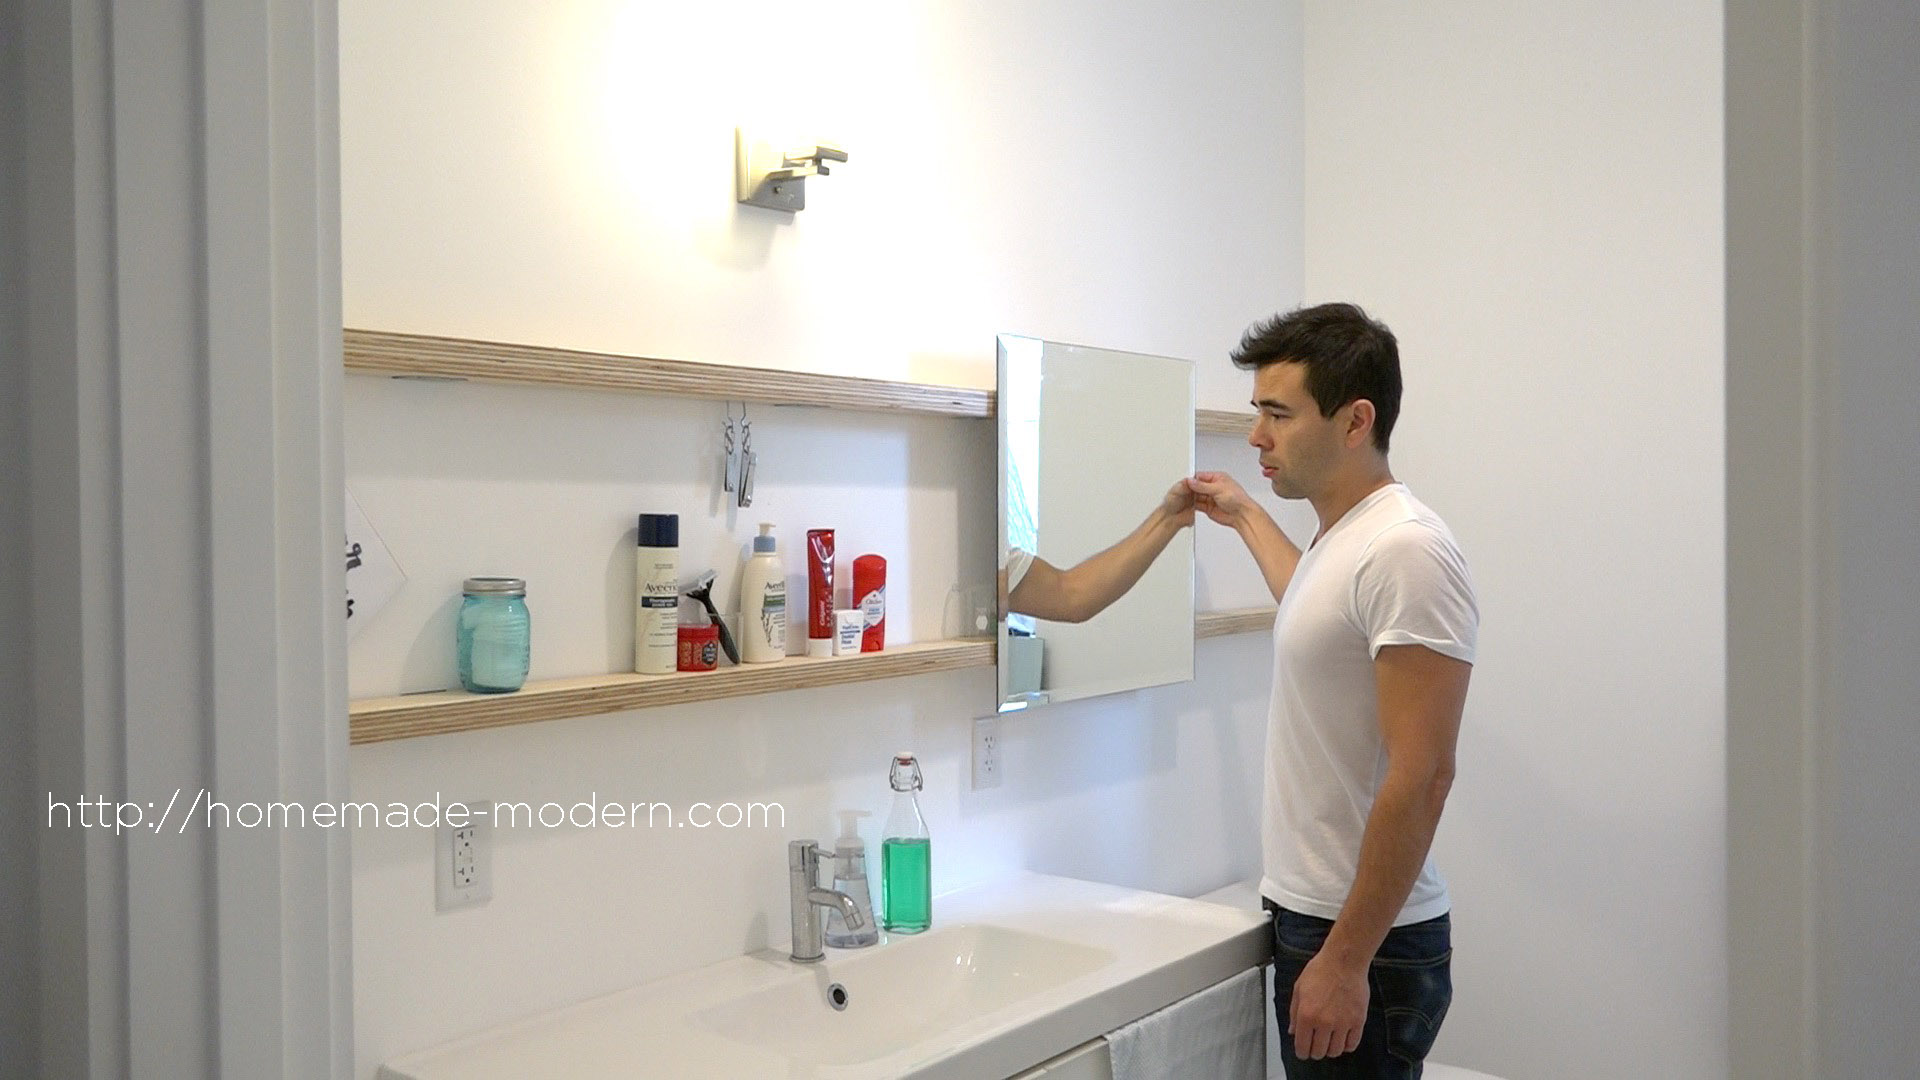 This bathroom mirror features DIY hardware that slides on plywood shelves. Full instructions can be found at HomeMade-Modern.com